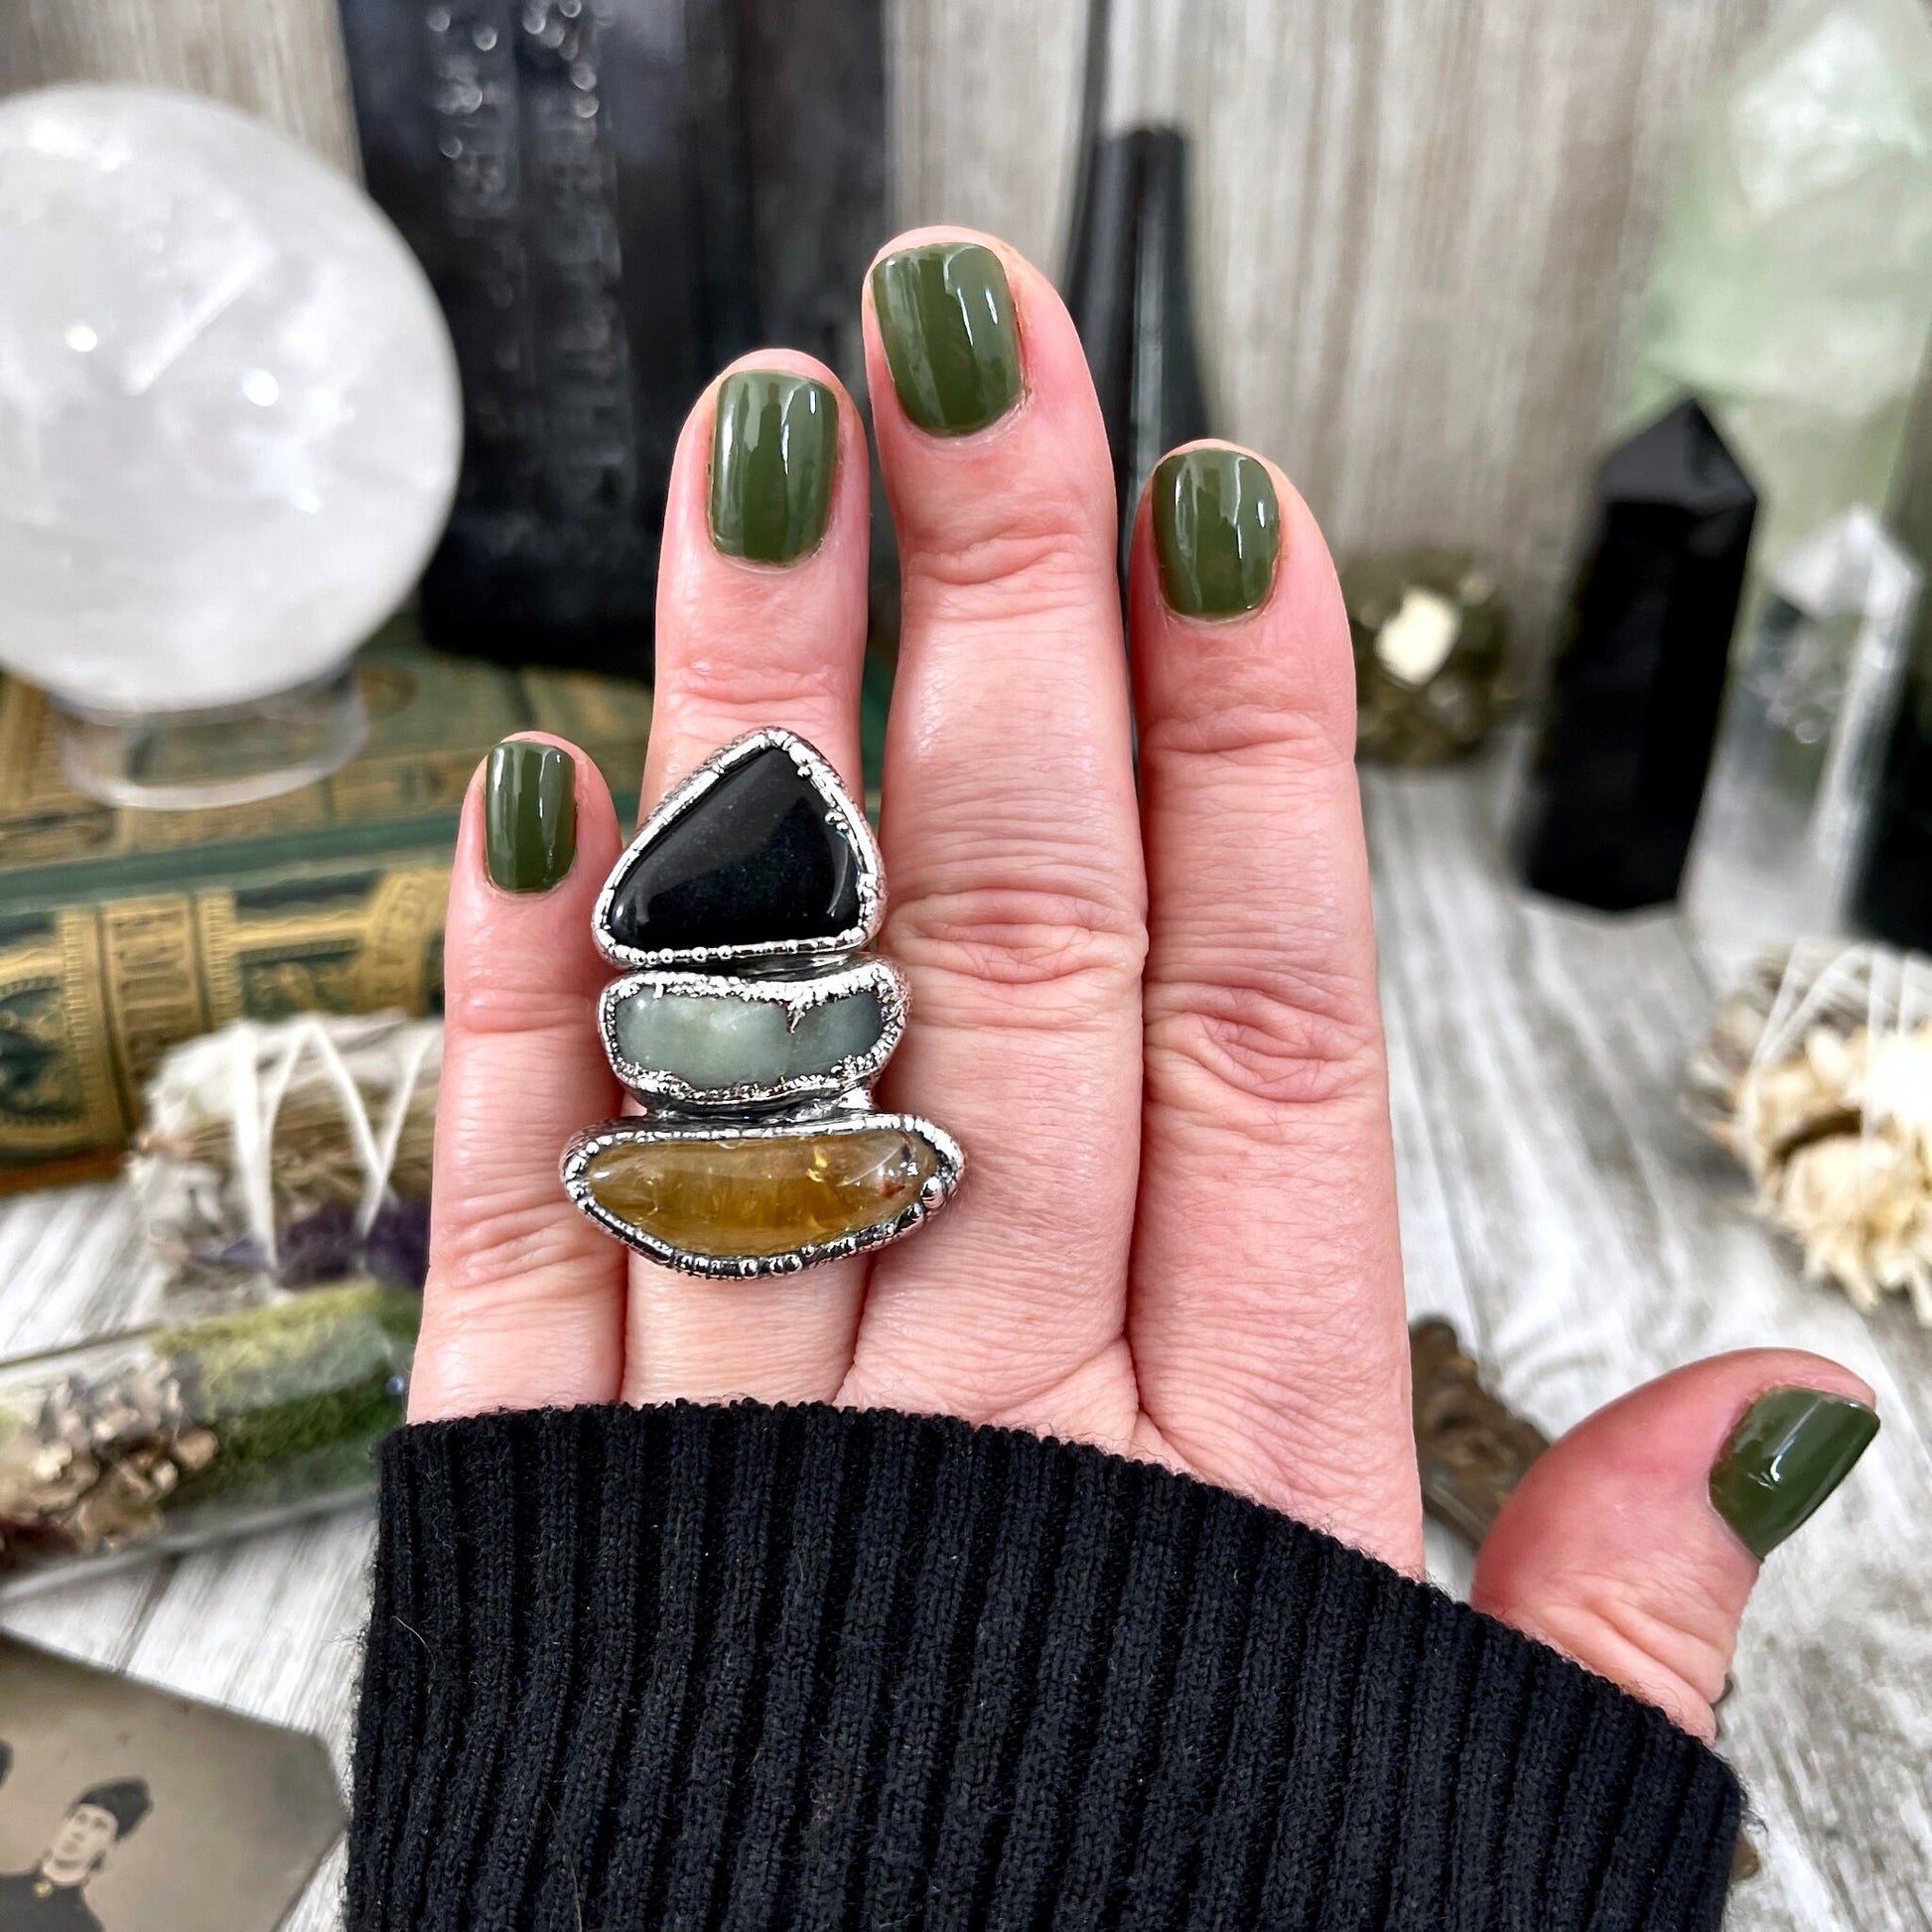 Size 6.5 Crystal Ring - Three Stone Black Onyx Aventurine Citrine Ring in Sliver / Foxlark Collection - One of a Kind / Big Crystal Jewelry